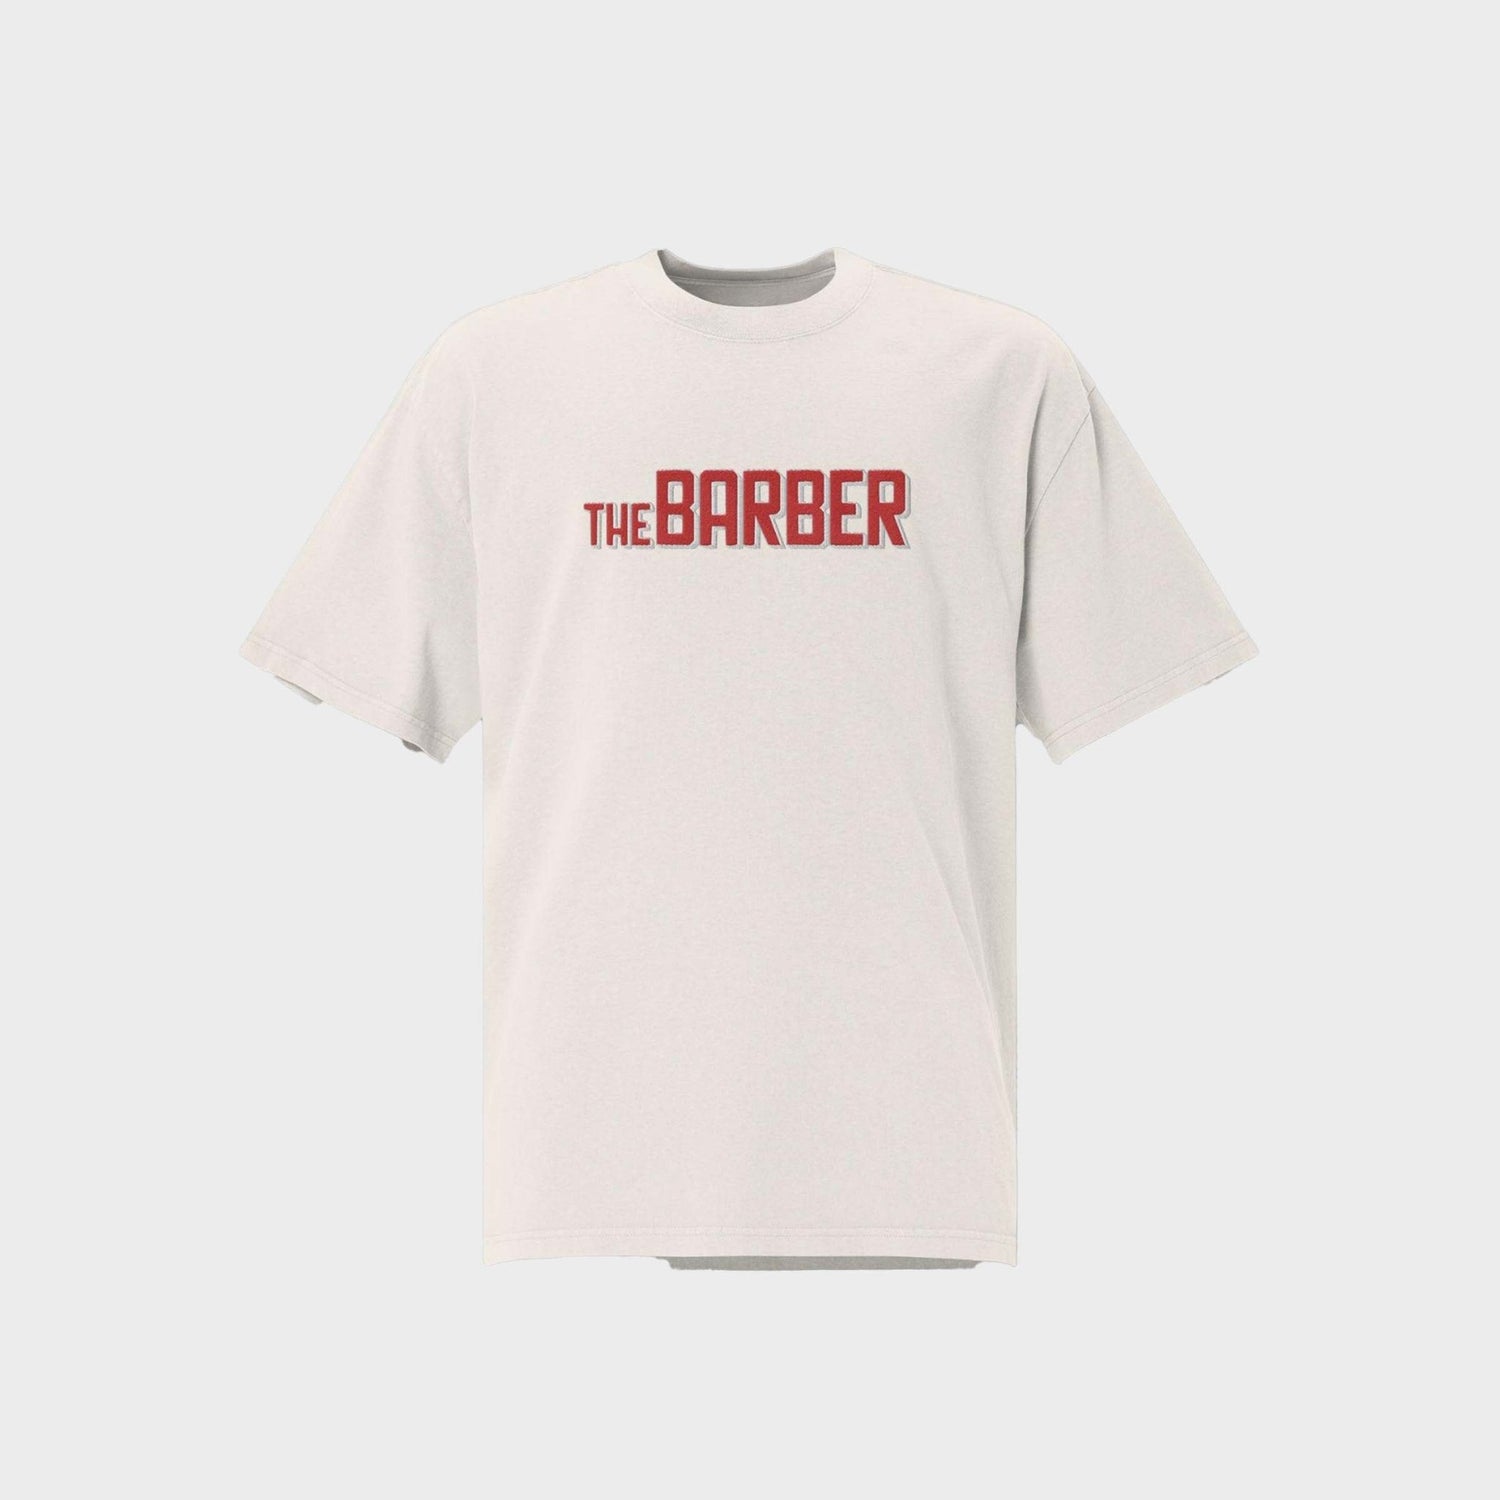 Statement Red/White - The Barber Style